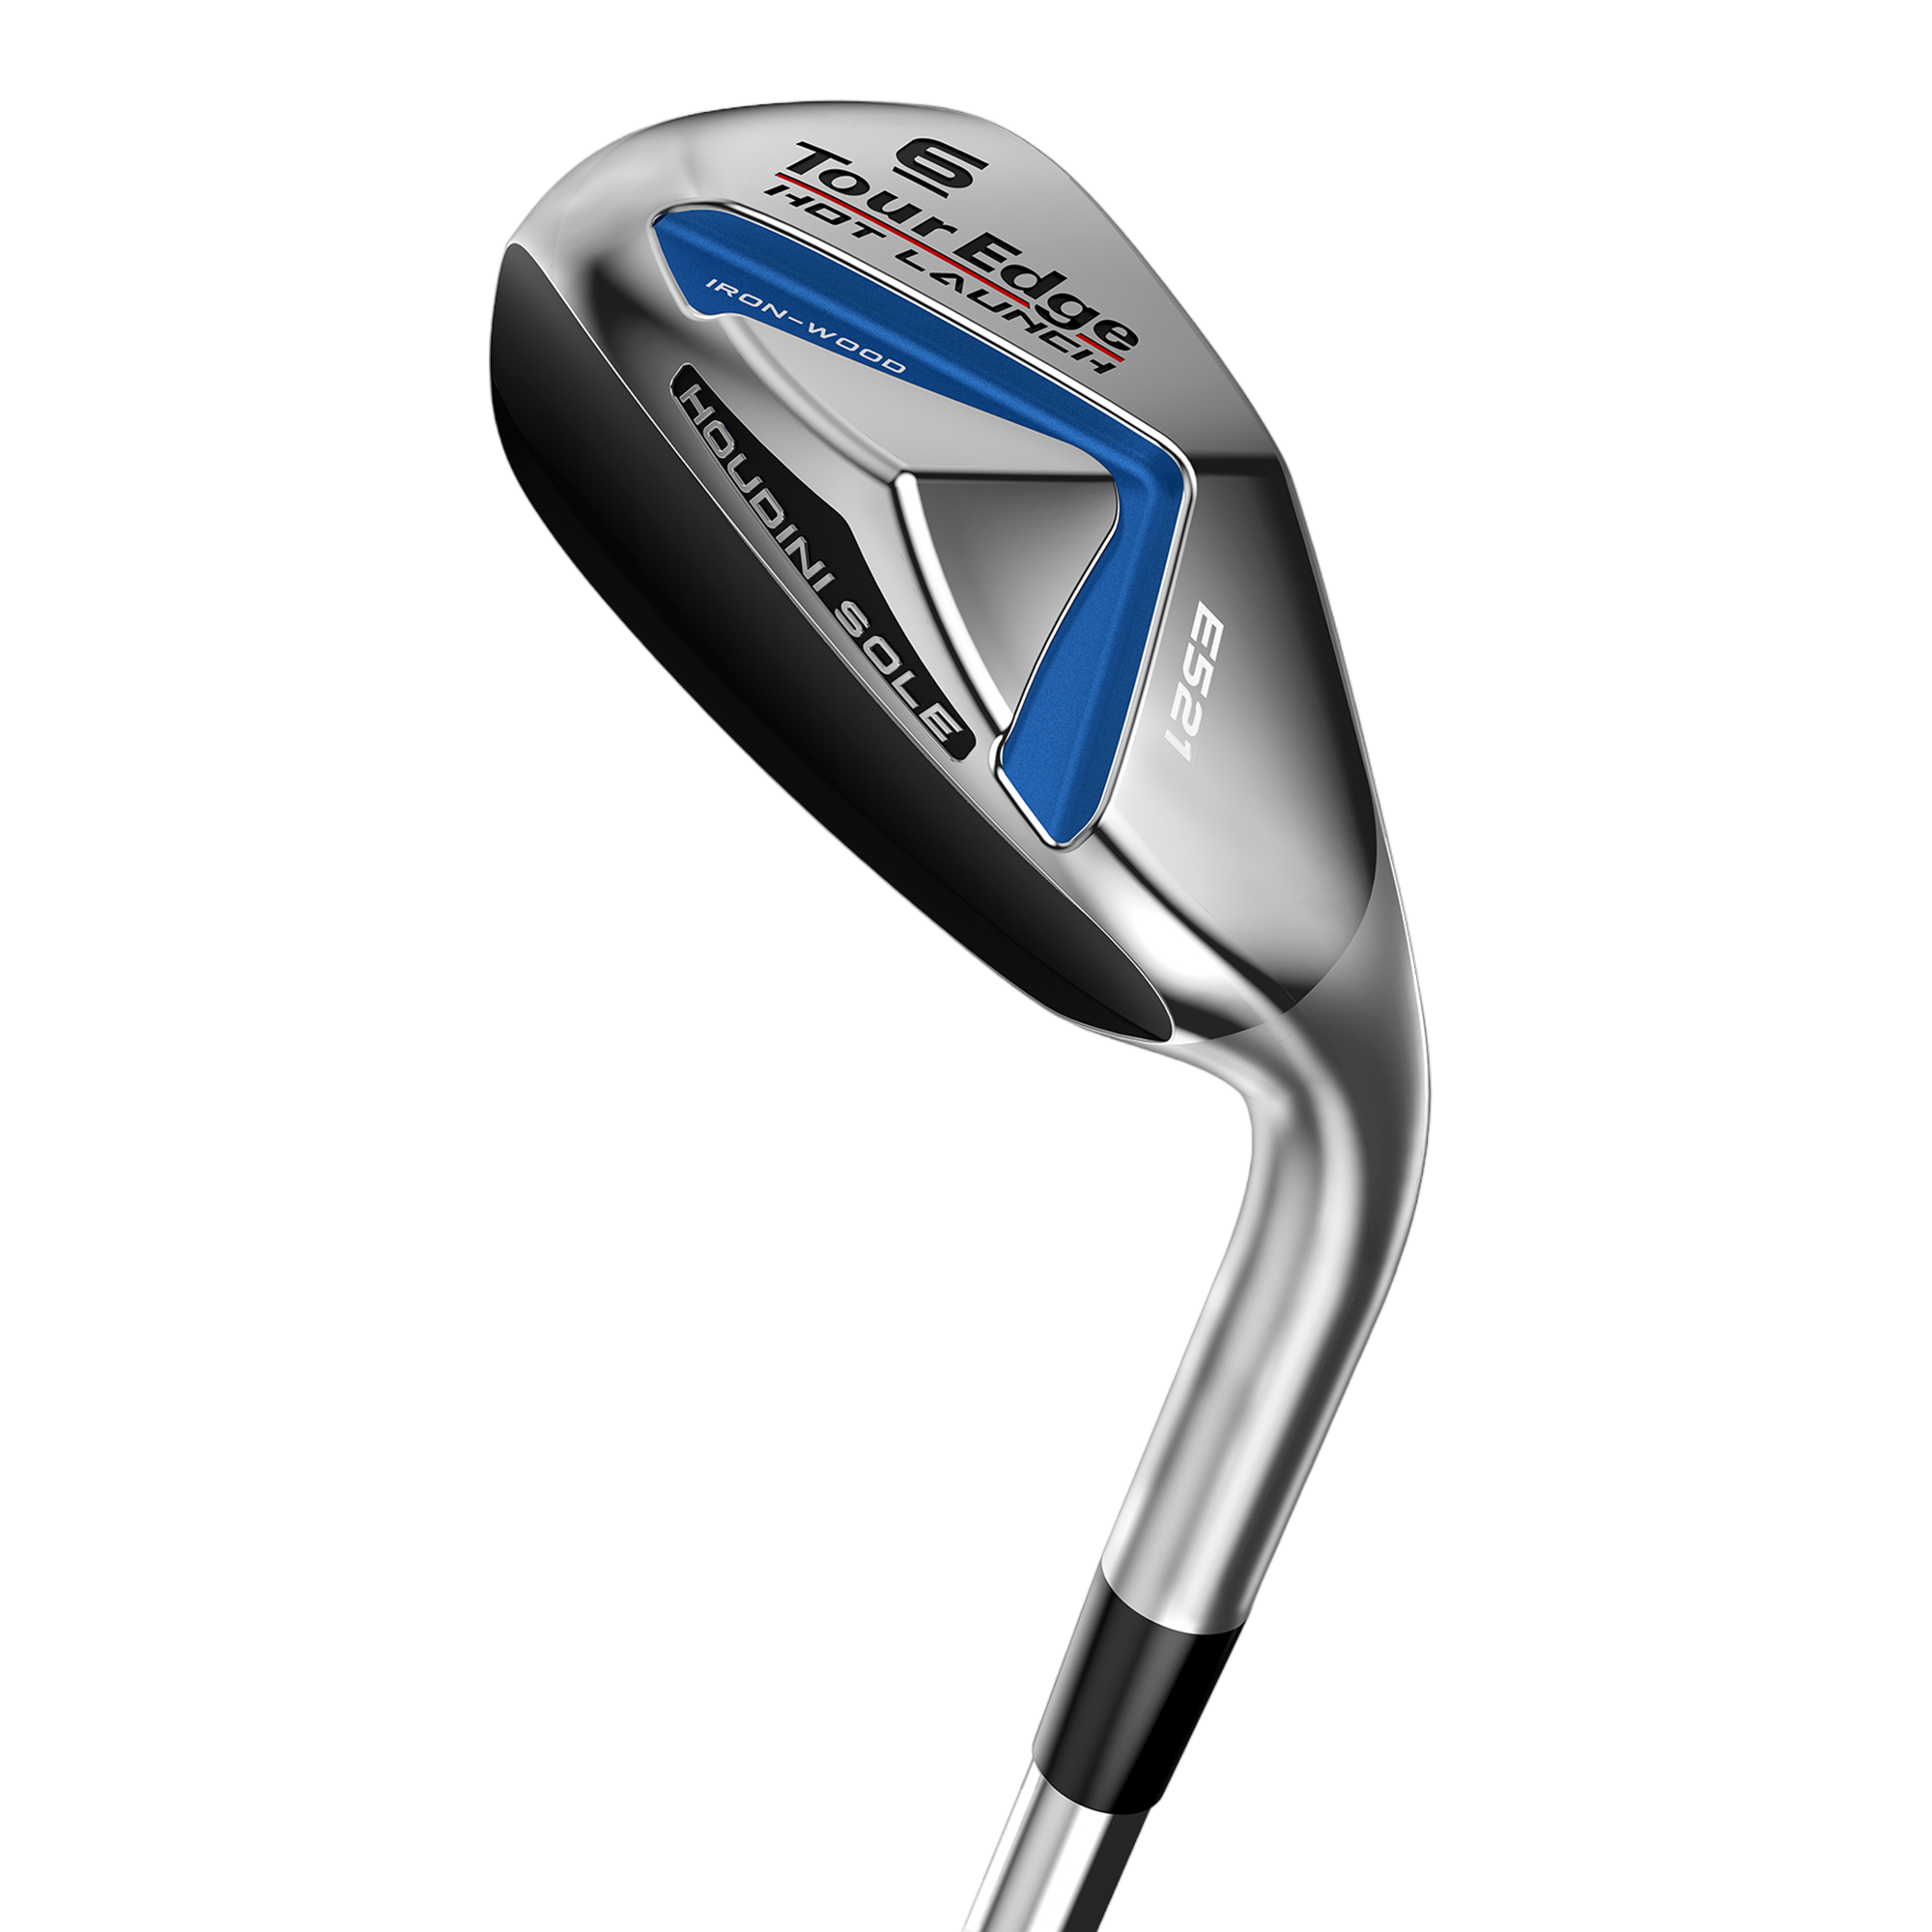 Hot Launch E521 Individual Iron-Woods/Wedges w/ Graphite Shafts